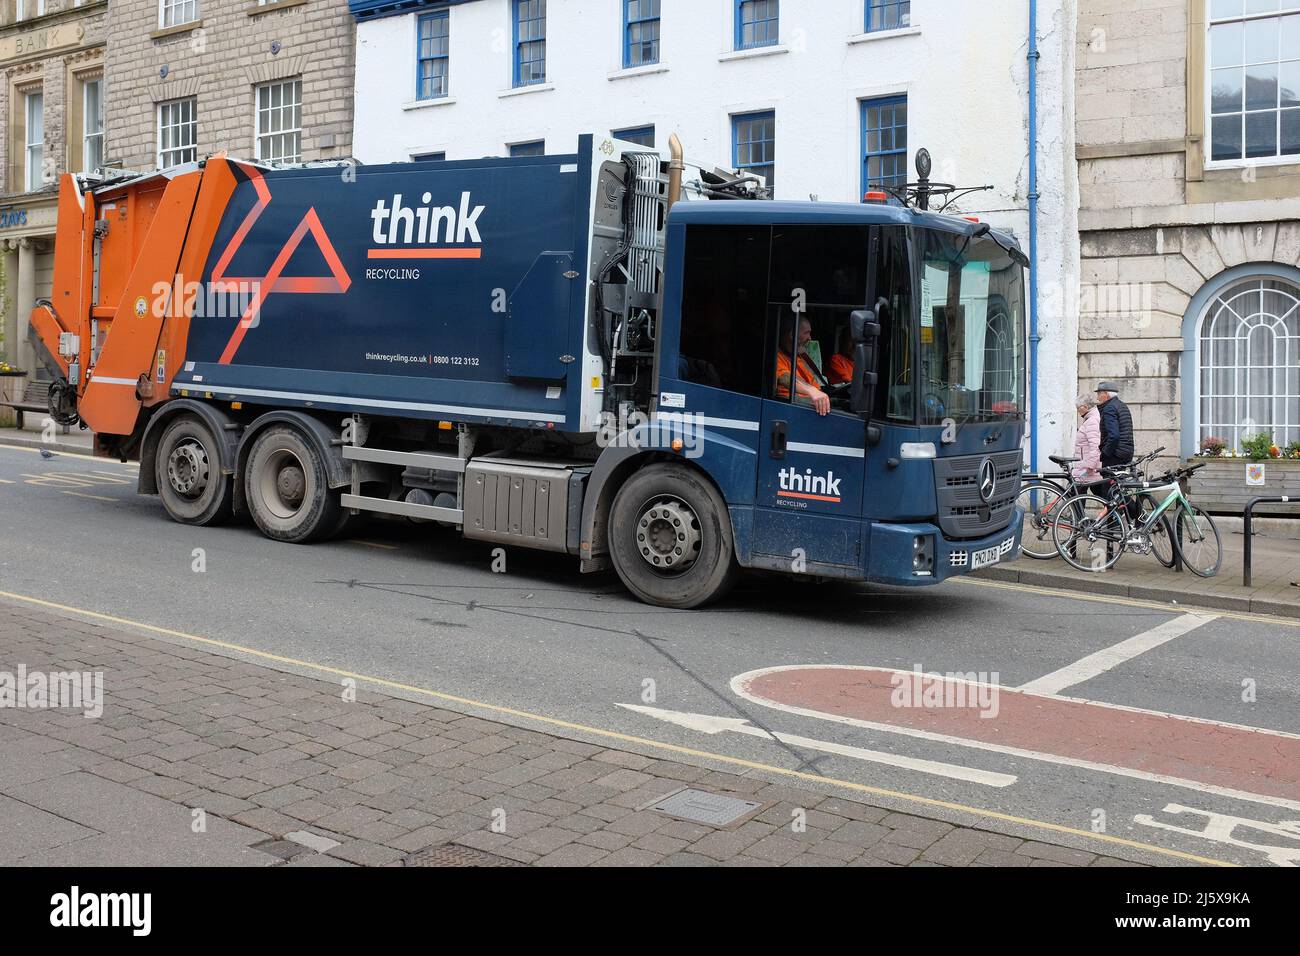 A recycling truck with the branding 'Think' on it waiting at the roadside in Kendal, Cumbria, UK Stock Photo